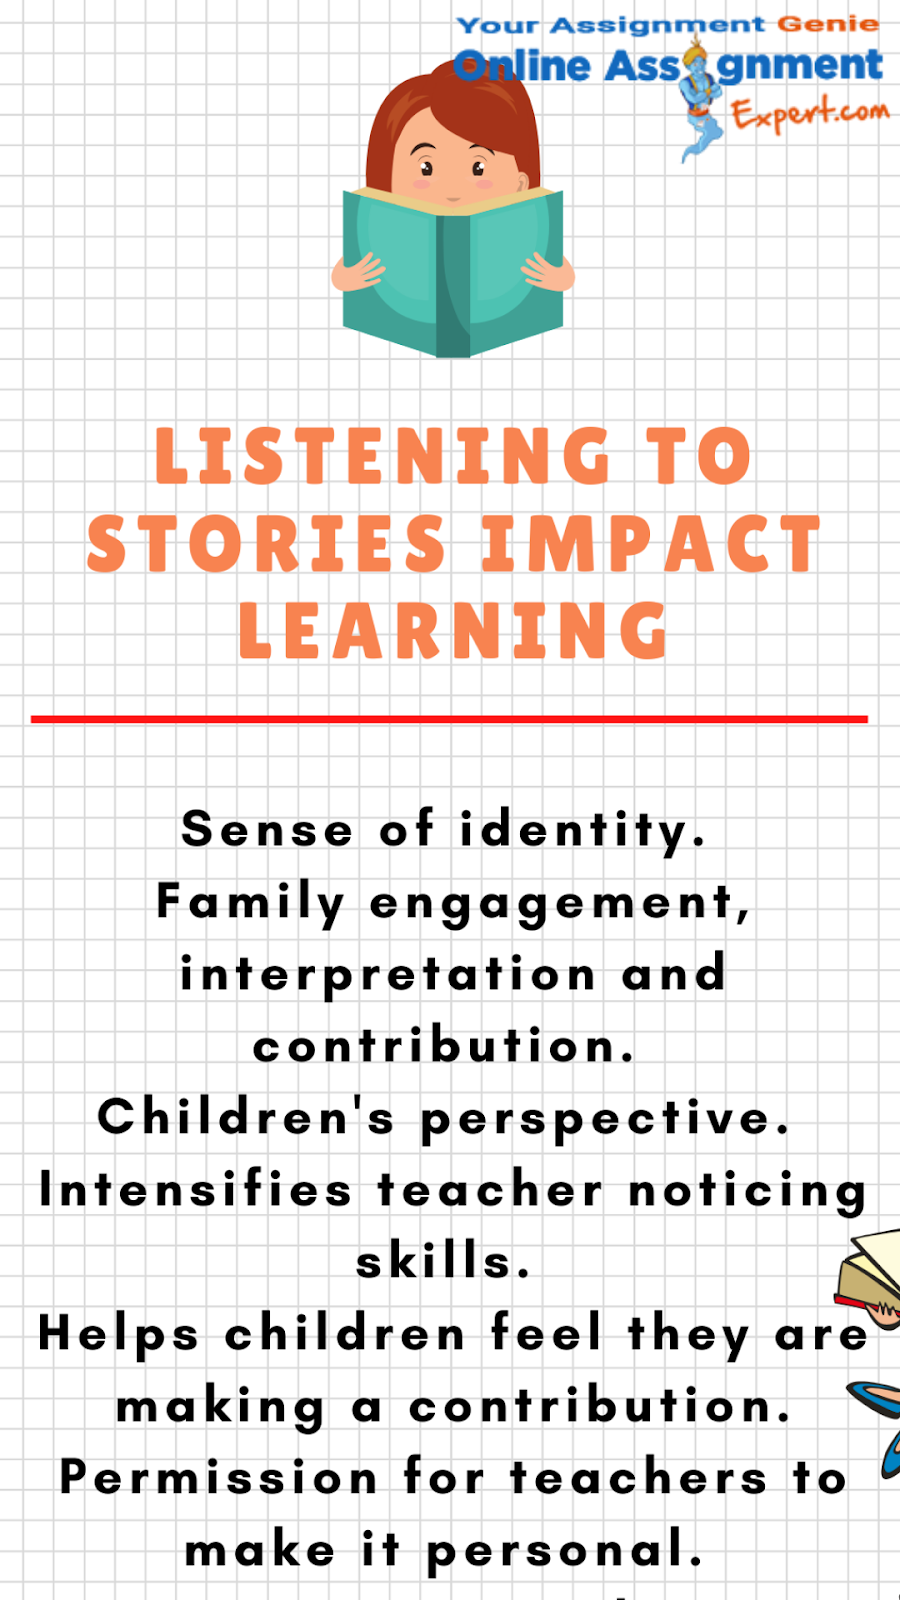 listening to stories impact learning